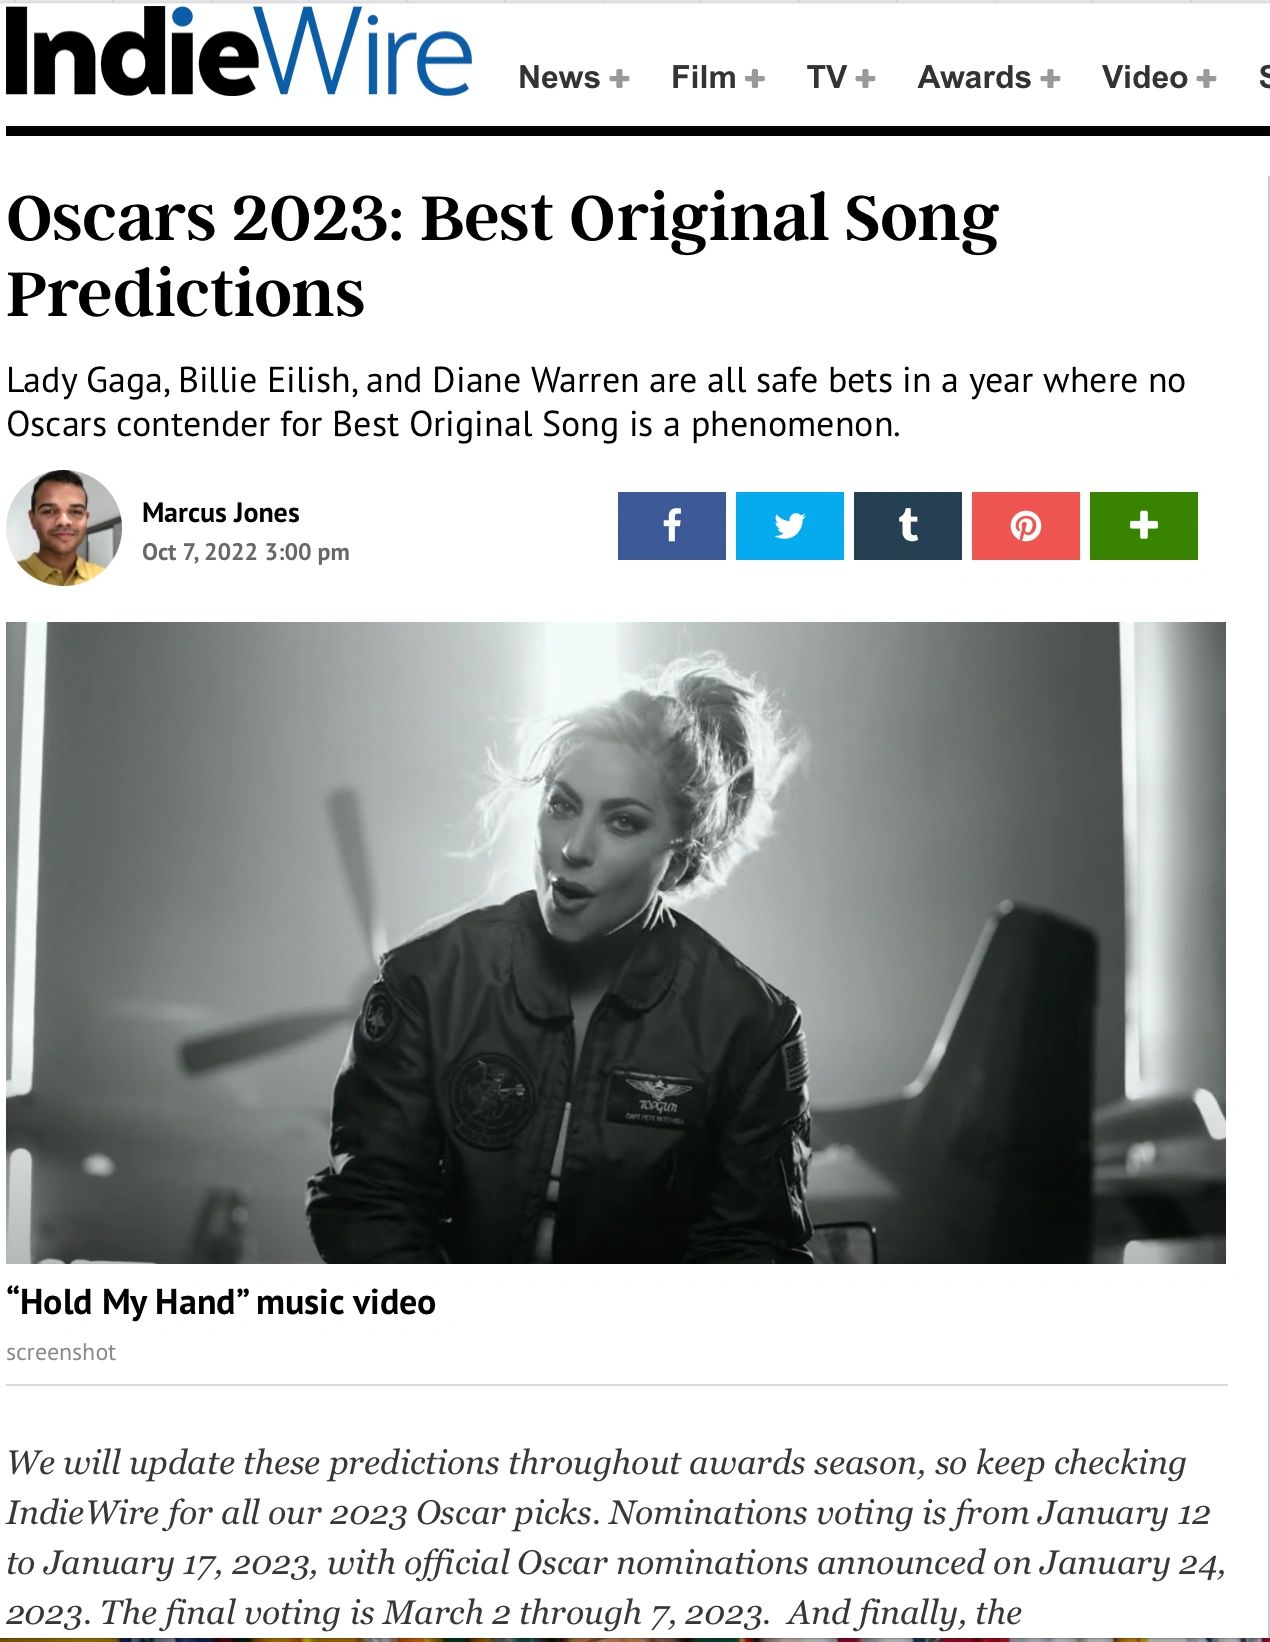 IndieWire Oscars 2023 Best Original Song Predictions